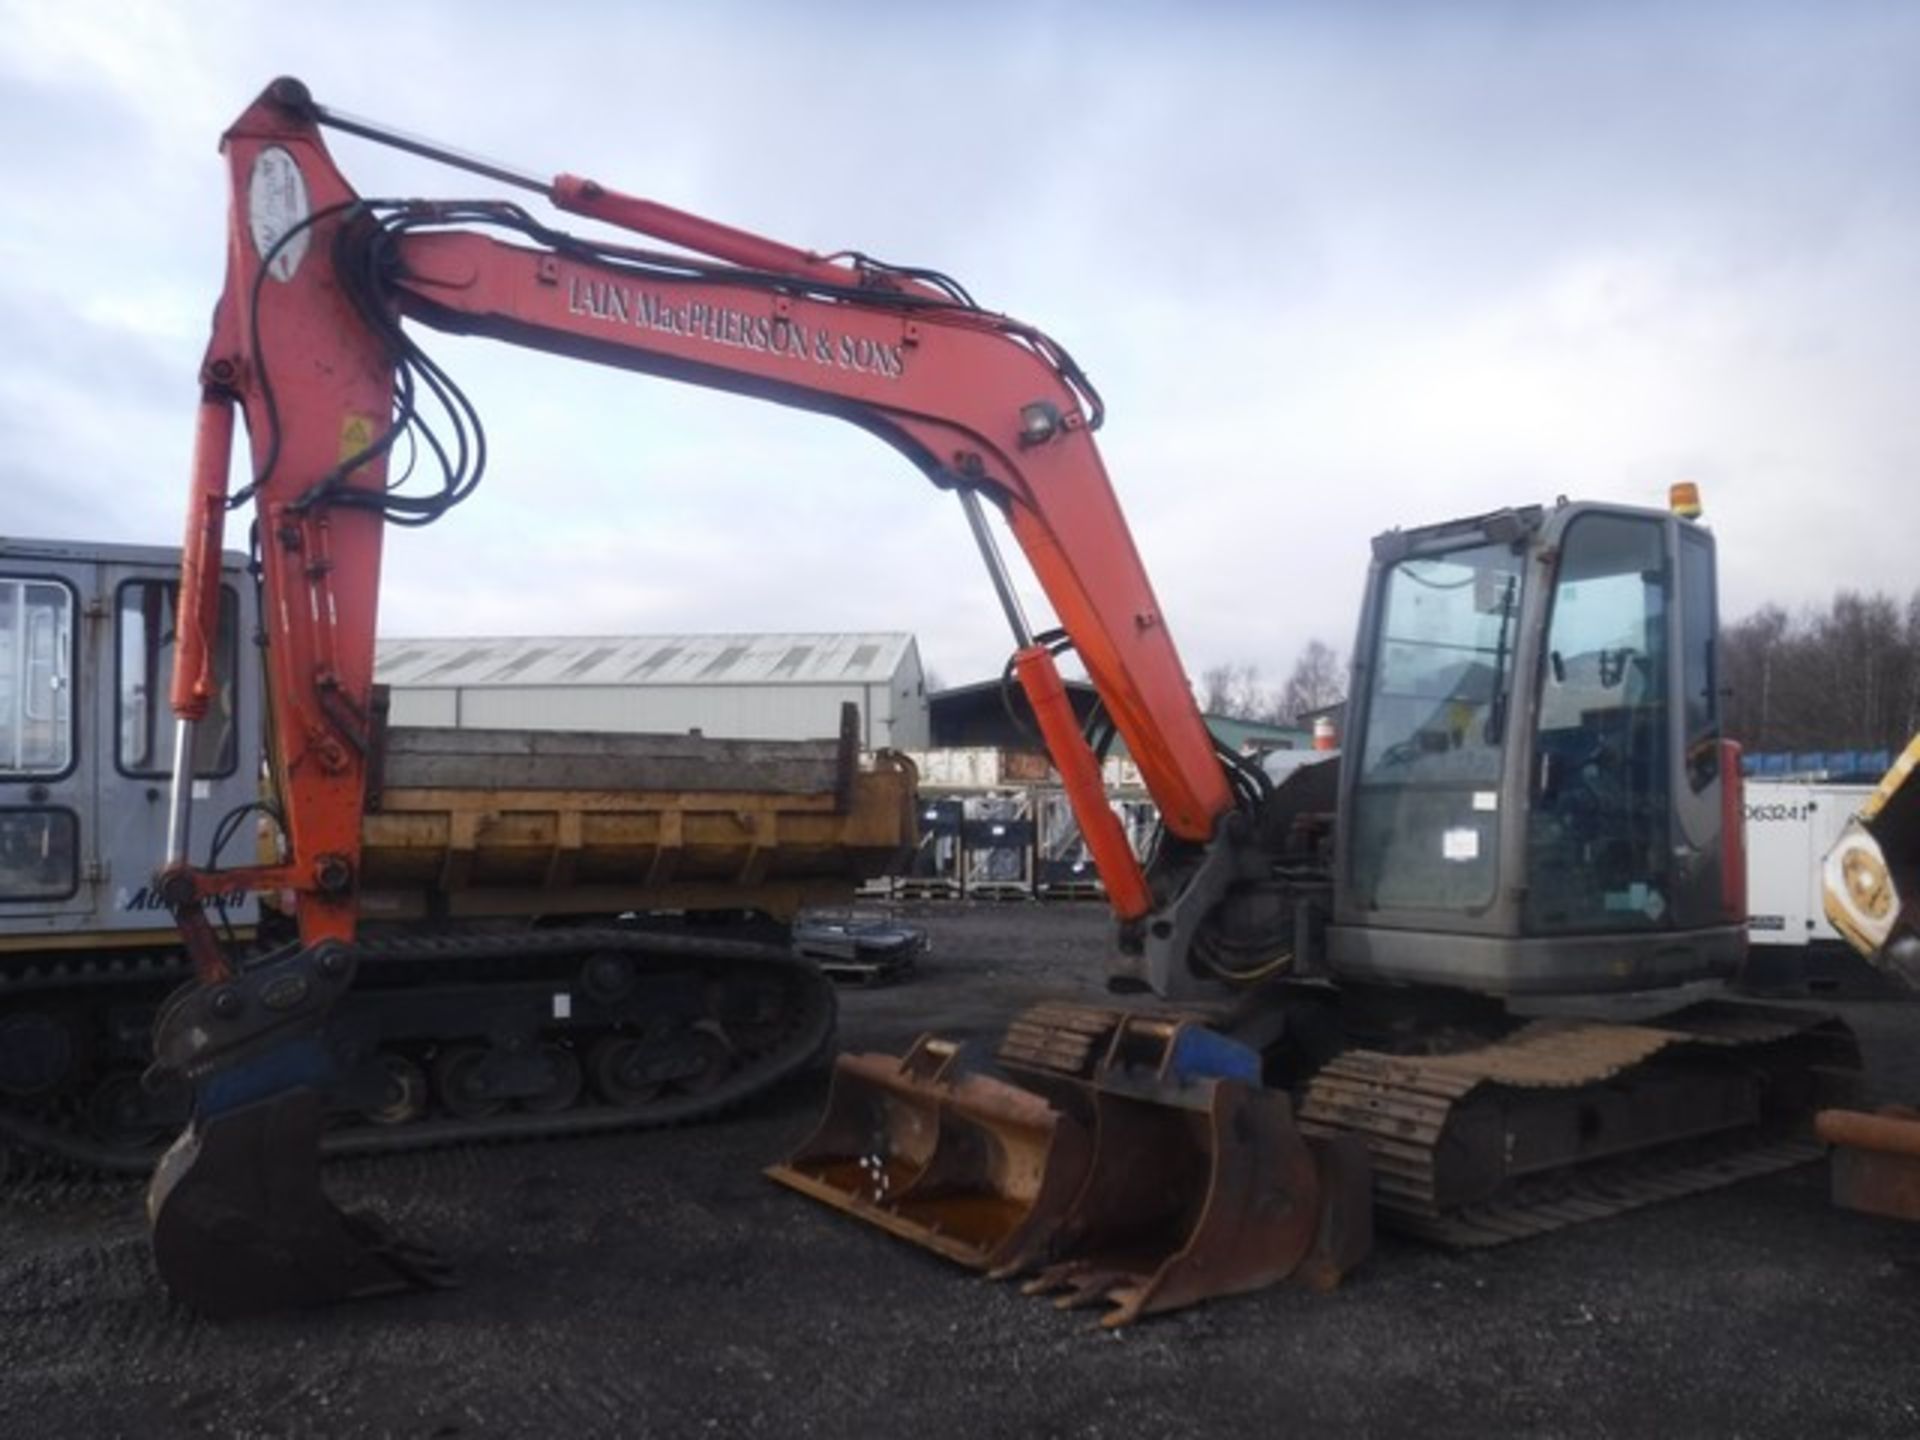 2009 HITACHI 360 EXCAVATOR ZAXIS 85 C/W 3 BUCKETS AND QUICK HITCH 6441HRS (NOT VERIFIED)